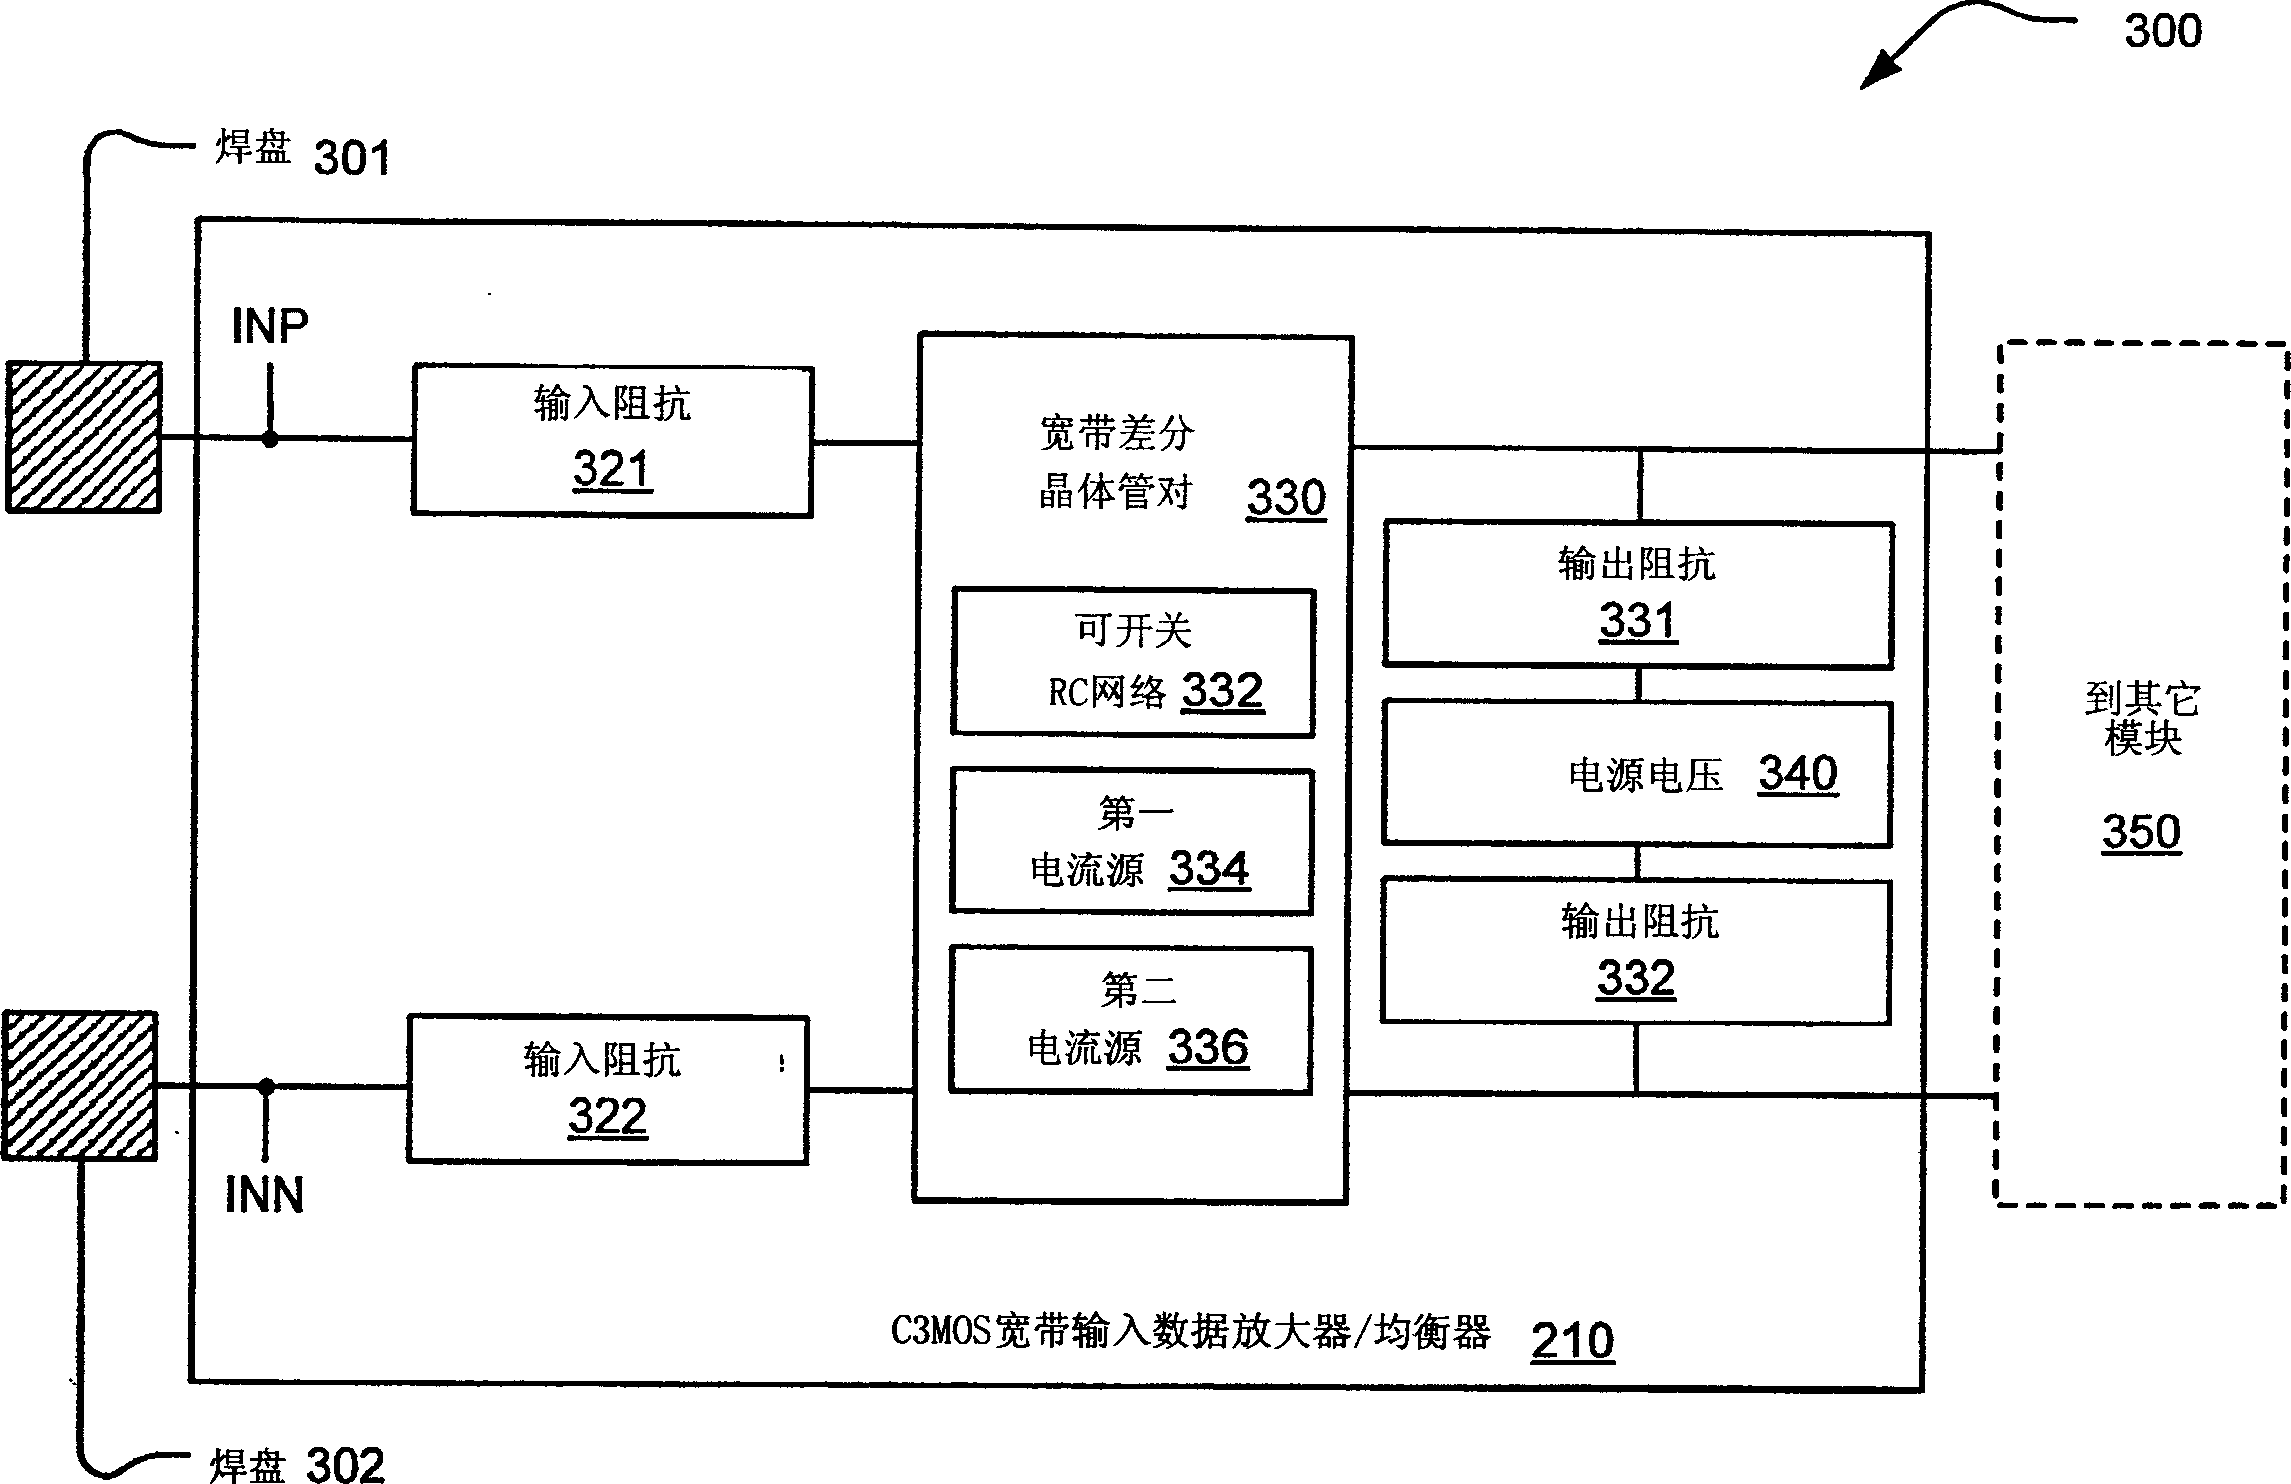 Current-controlled cmos wideband amplifier/equalizer circuit